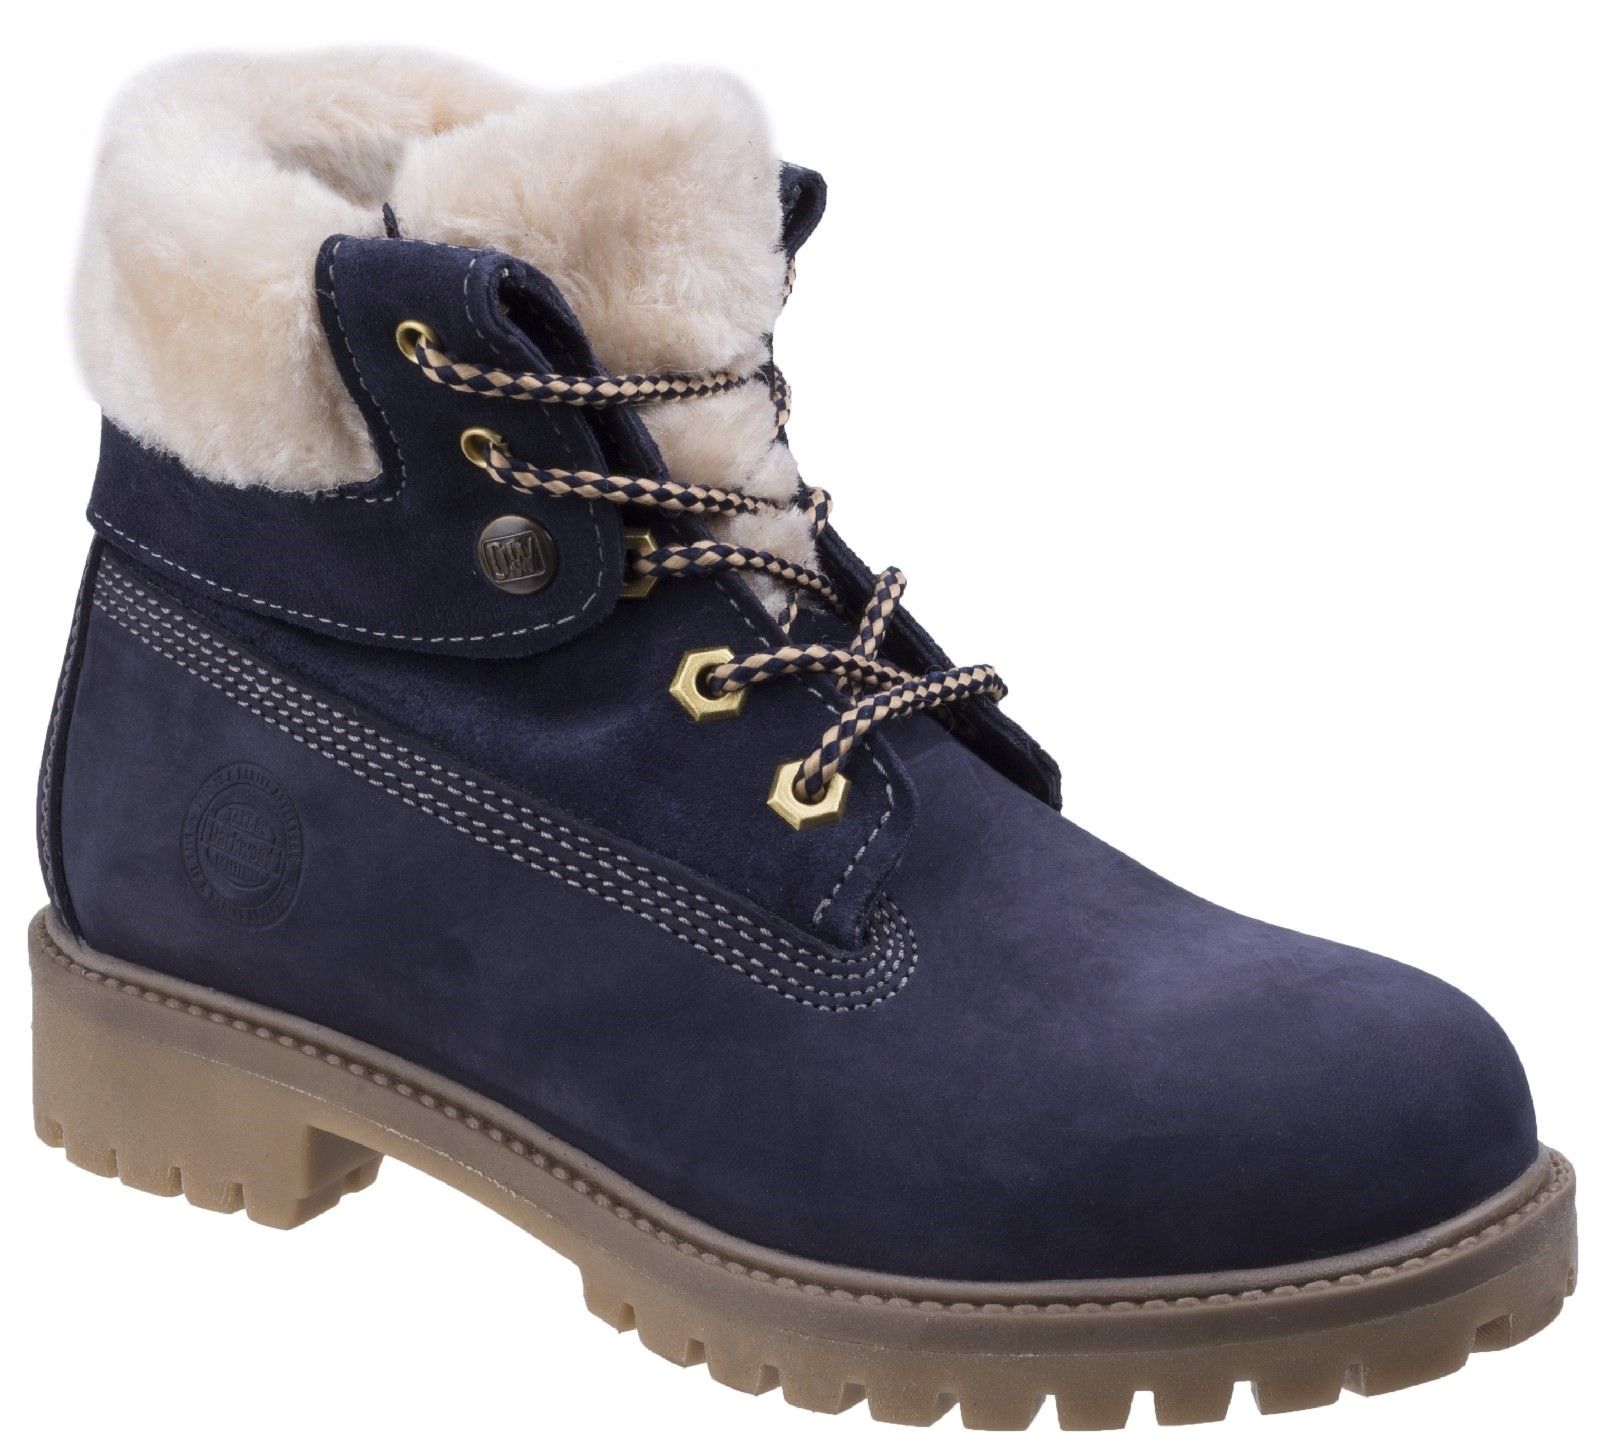 Darkwood boots with classy design, featuring water-resistant membrane. Perfect for hiking and cold weather conditions. Womens water-resistant casual boot. 
Artificial-Fur. 
Ideal for autumn and winter. 
Water-resistant genuine leather. 
Good level of puncture resistance against brambles.